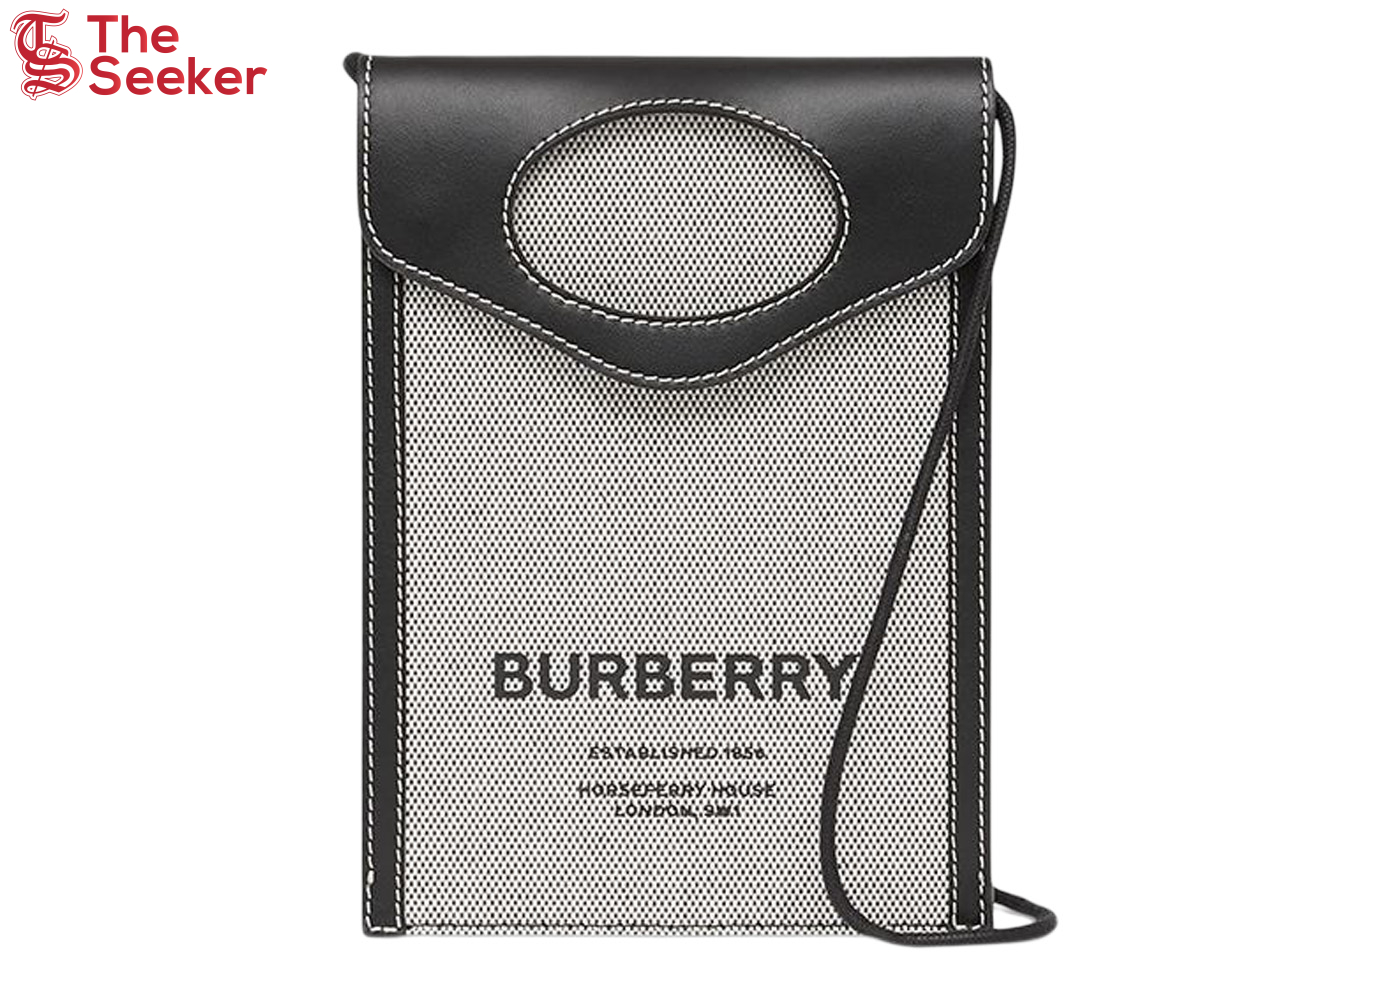 Burberry Leather And Canvas Phone Pouch Black/Gray